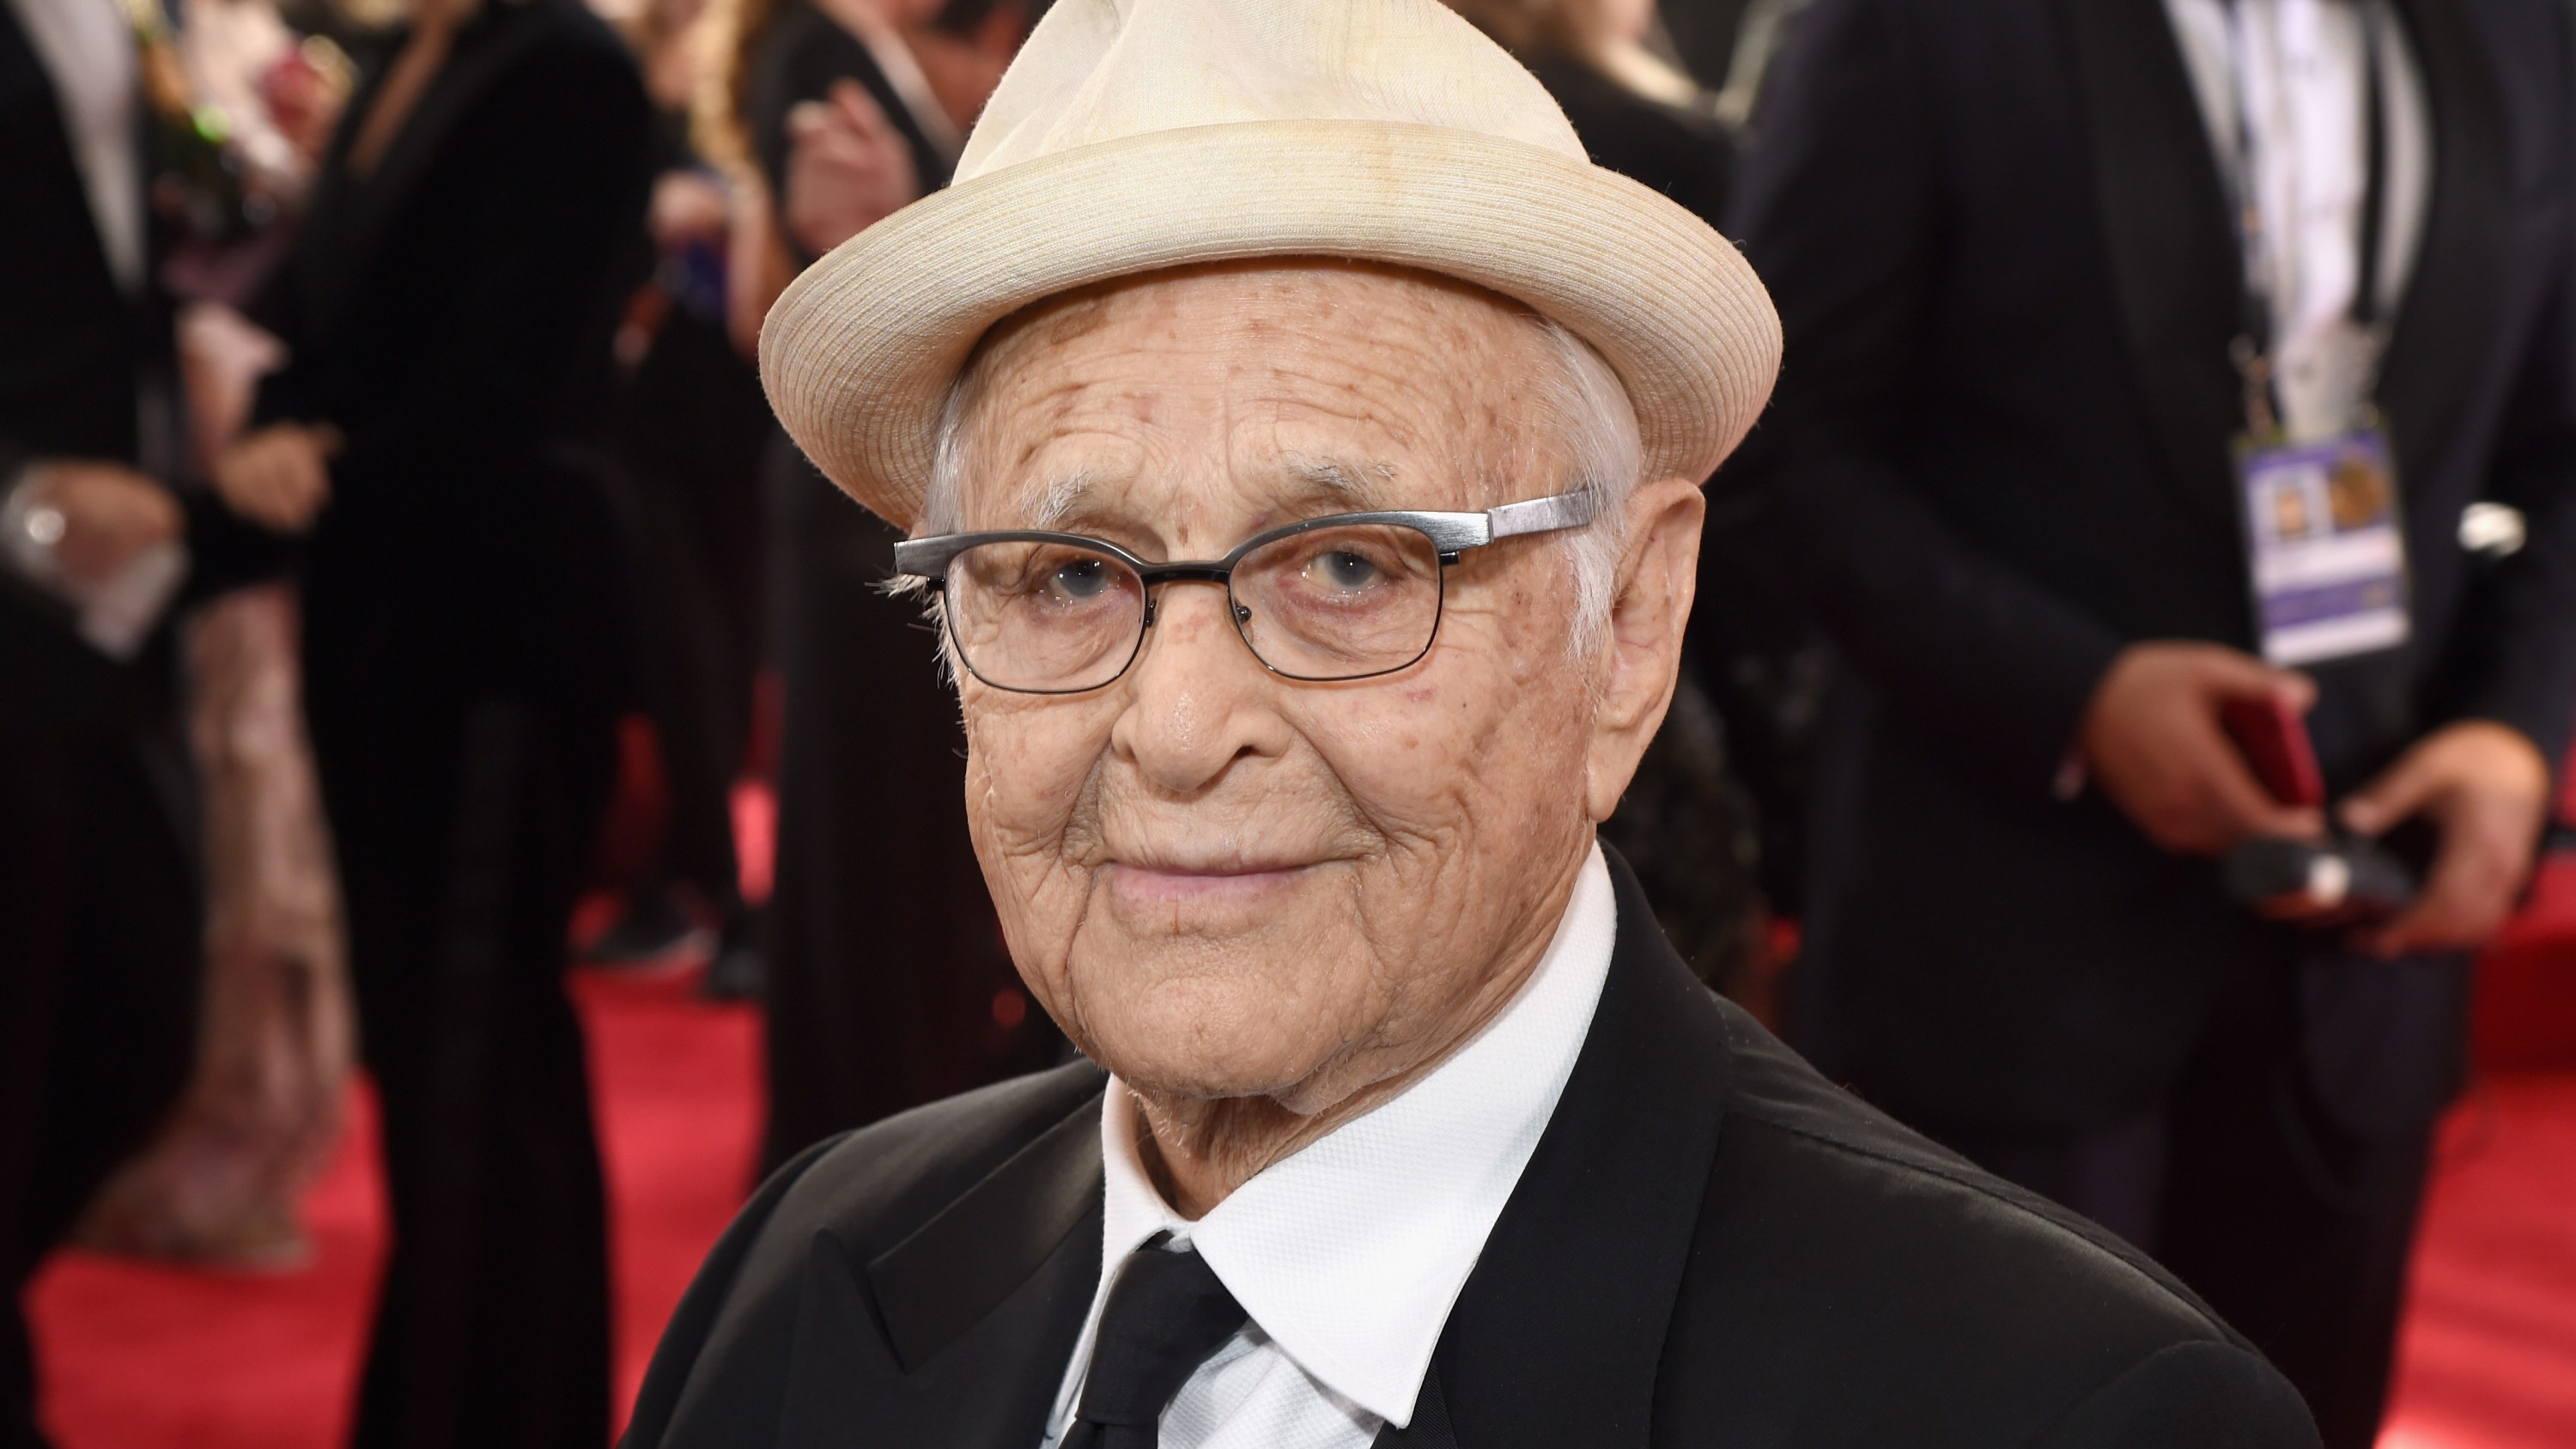 BEVERLY HILLS, CA - JANUARY 07: 
Norman Lear celebrates The 75th Annual Golden Globe Awards with Moet & Chandon at The Beverly Hilton Hotel on January 7, 2018 in Beverly Hills, California.  (Photo by Michael Kovac/Getty Images for Moet & Chandon)